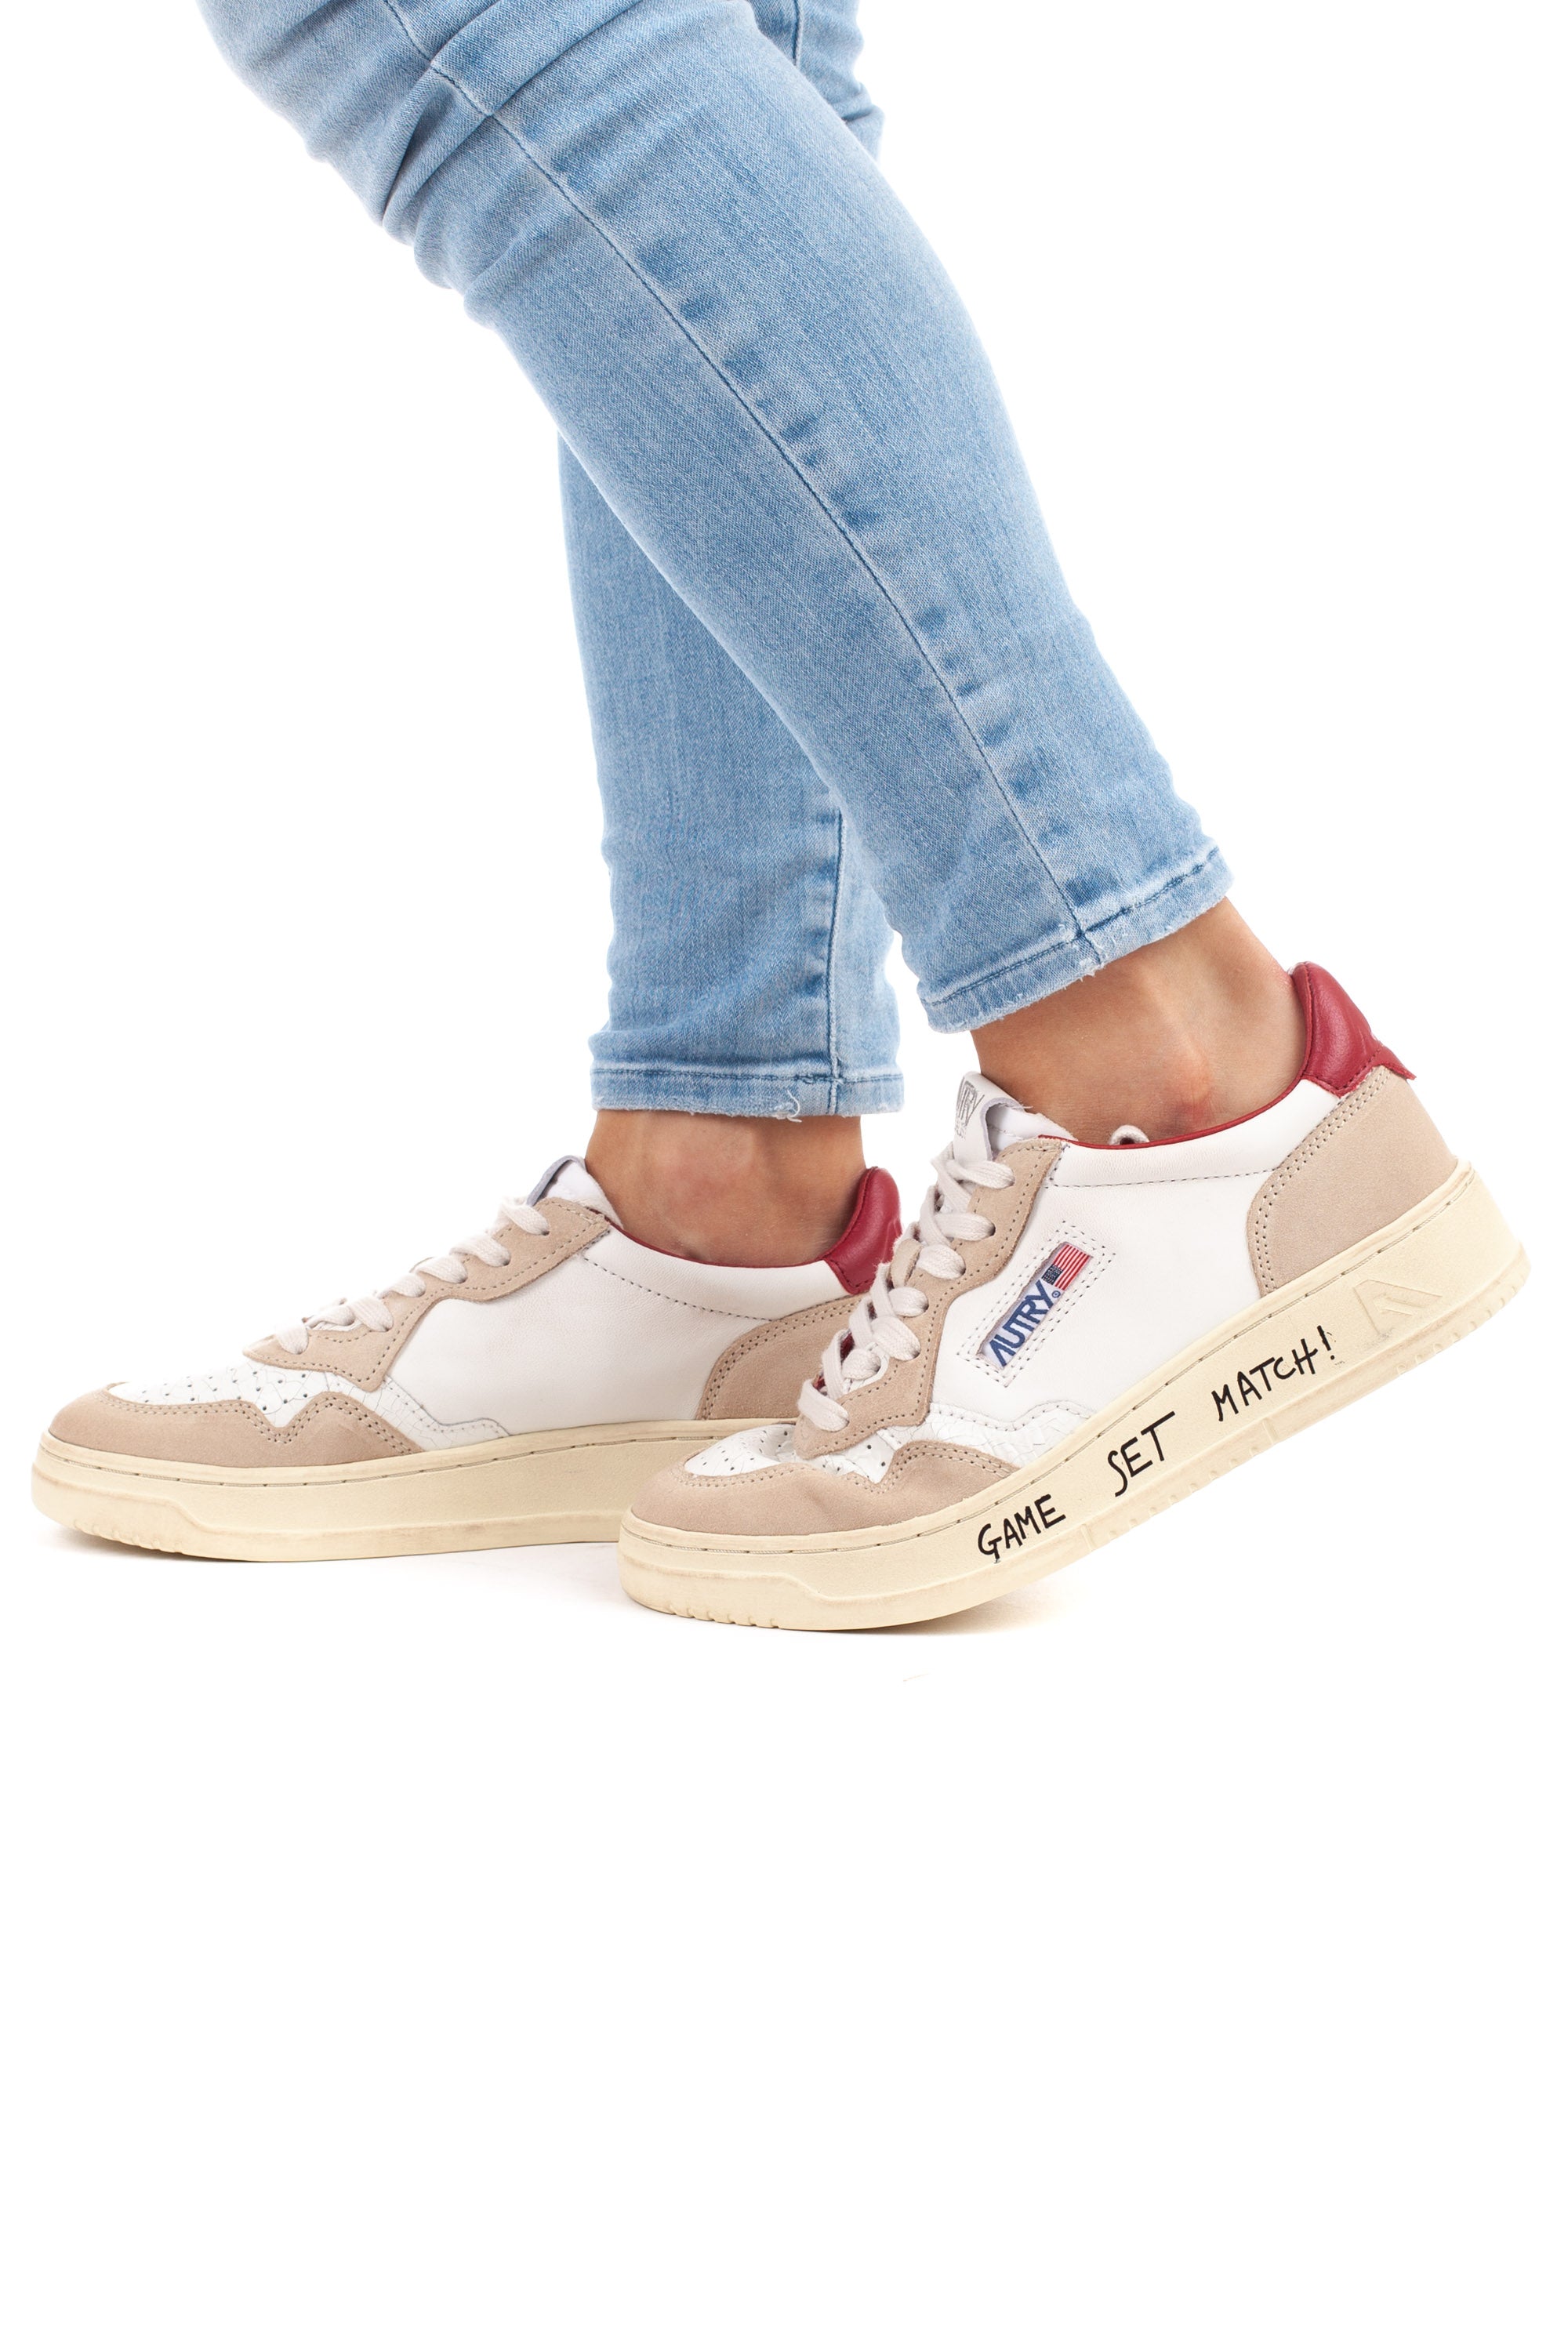 Medalist women's sneaker with red writing and heel tab